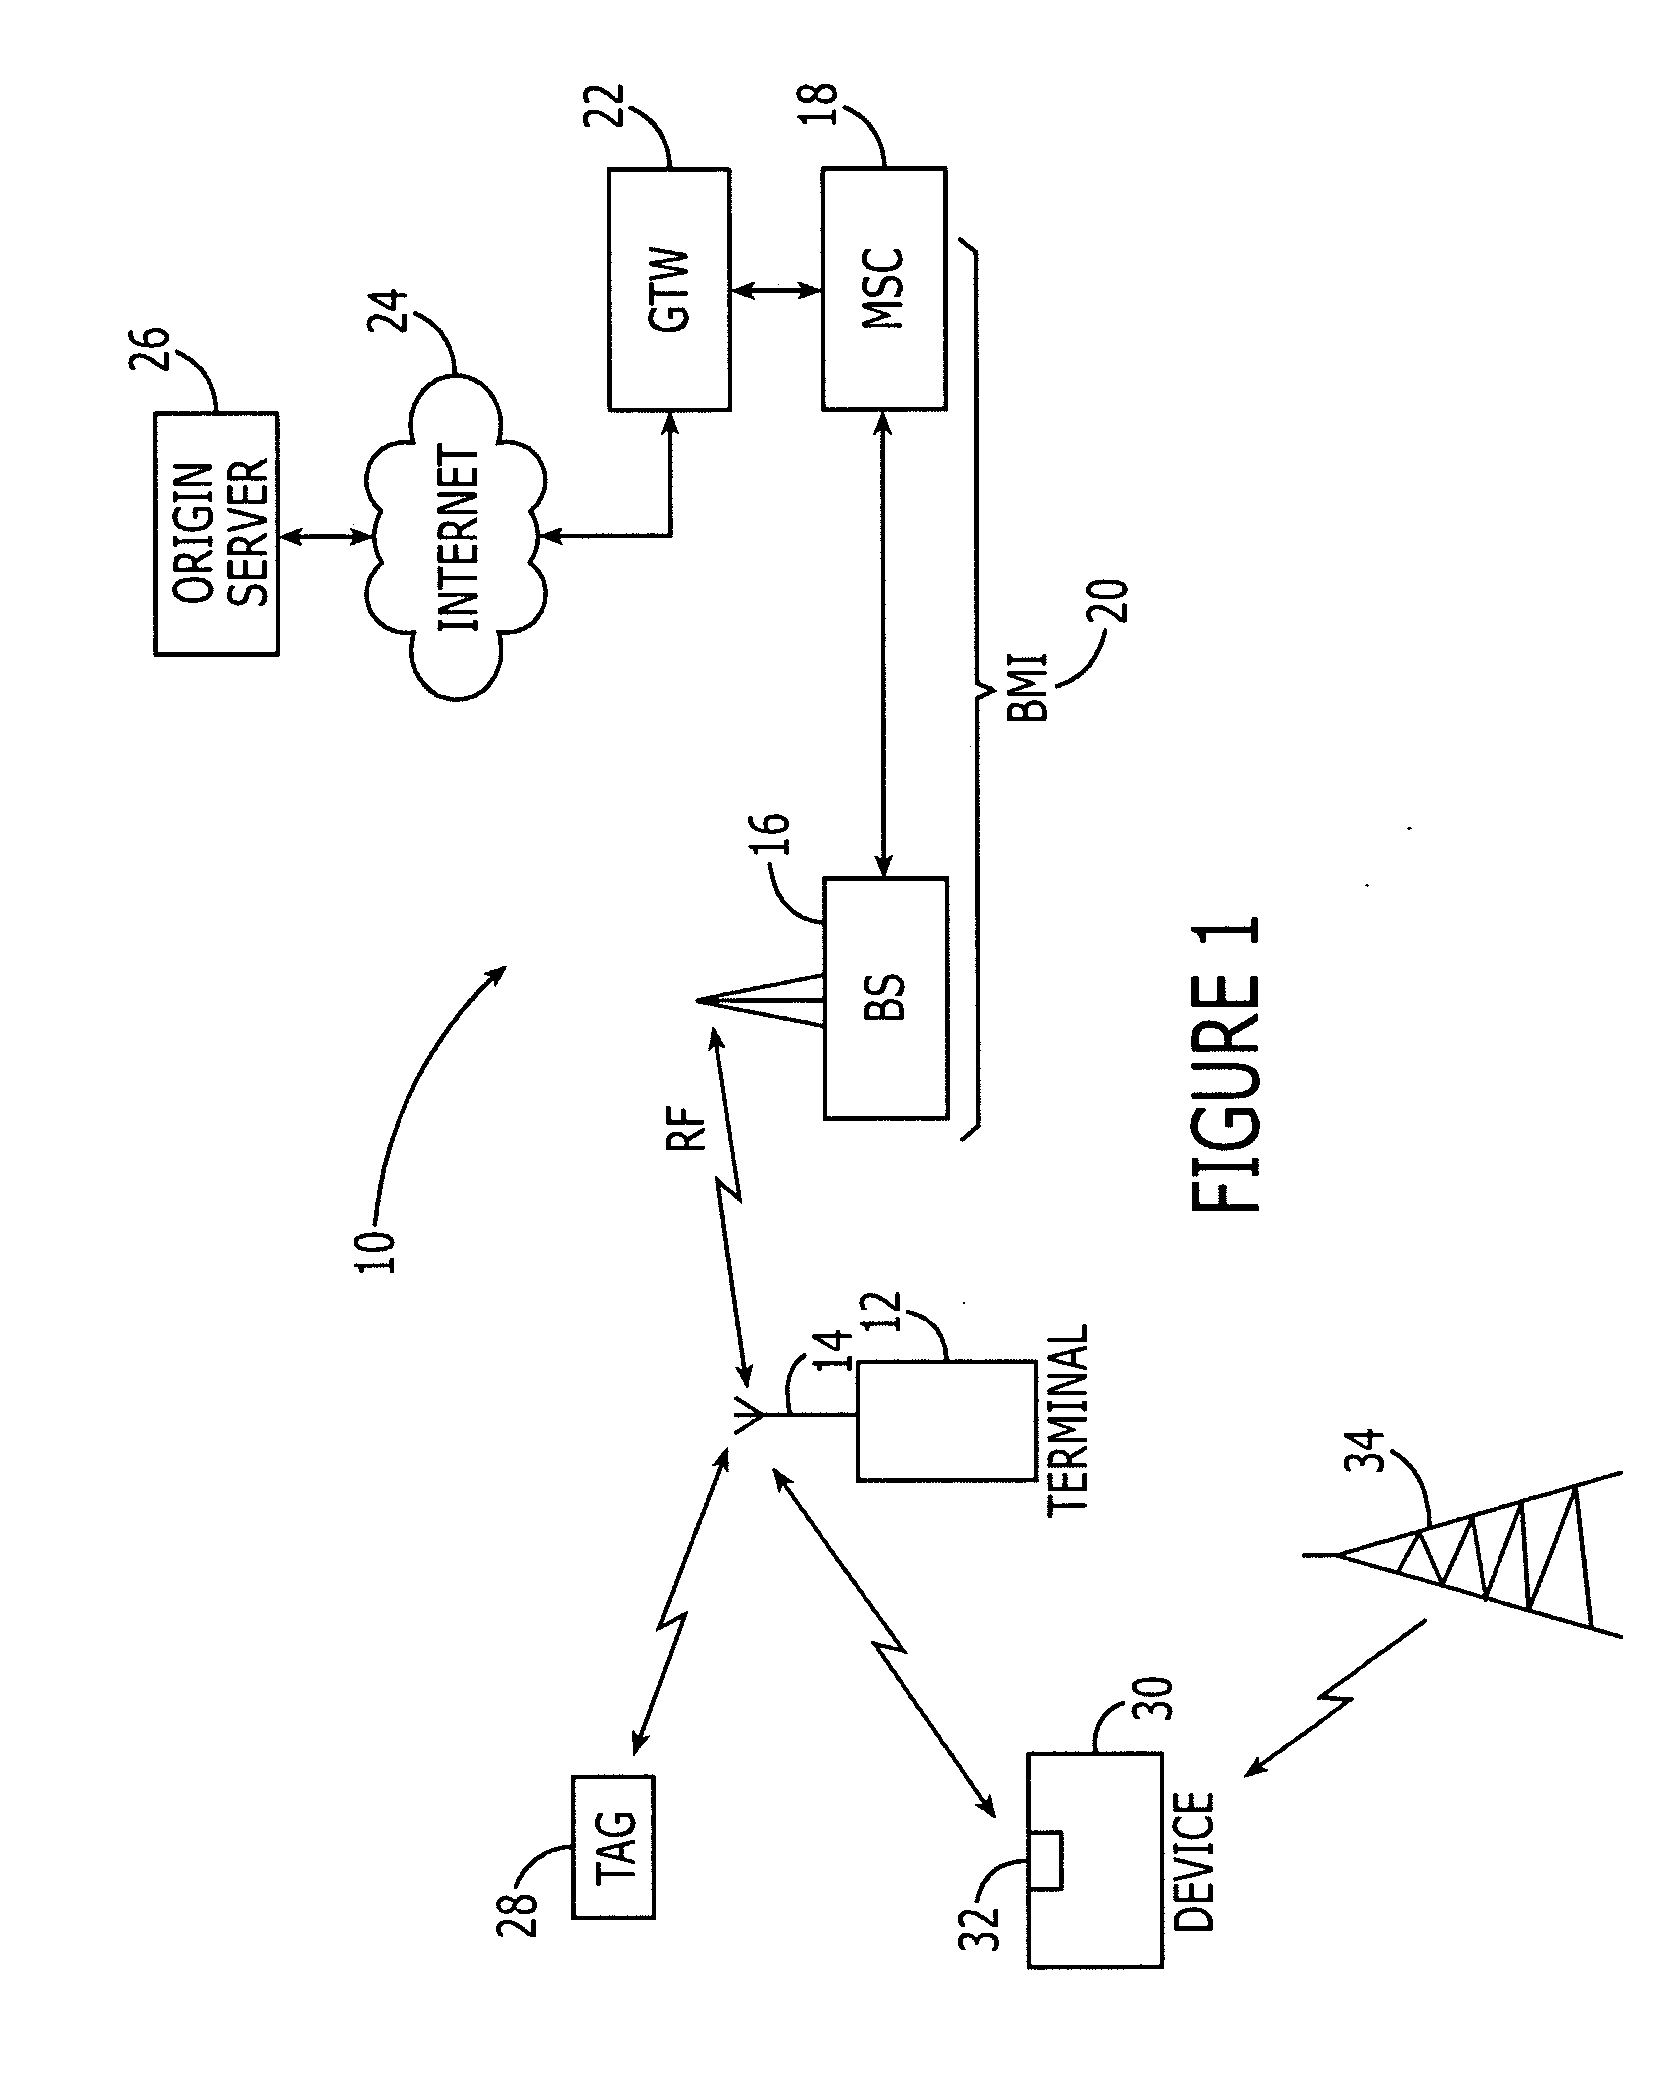 Methods, systems, devices and computer program products for providing user-access to broadcast content in combination with short-range communication content